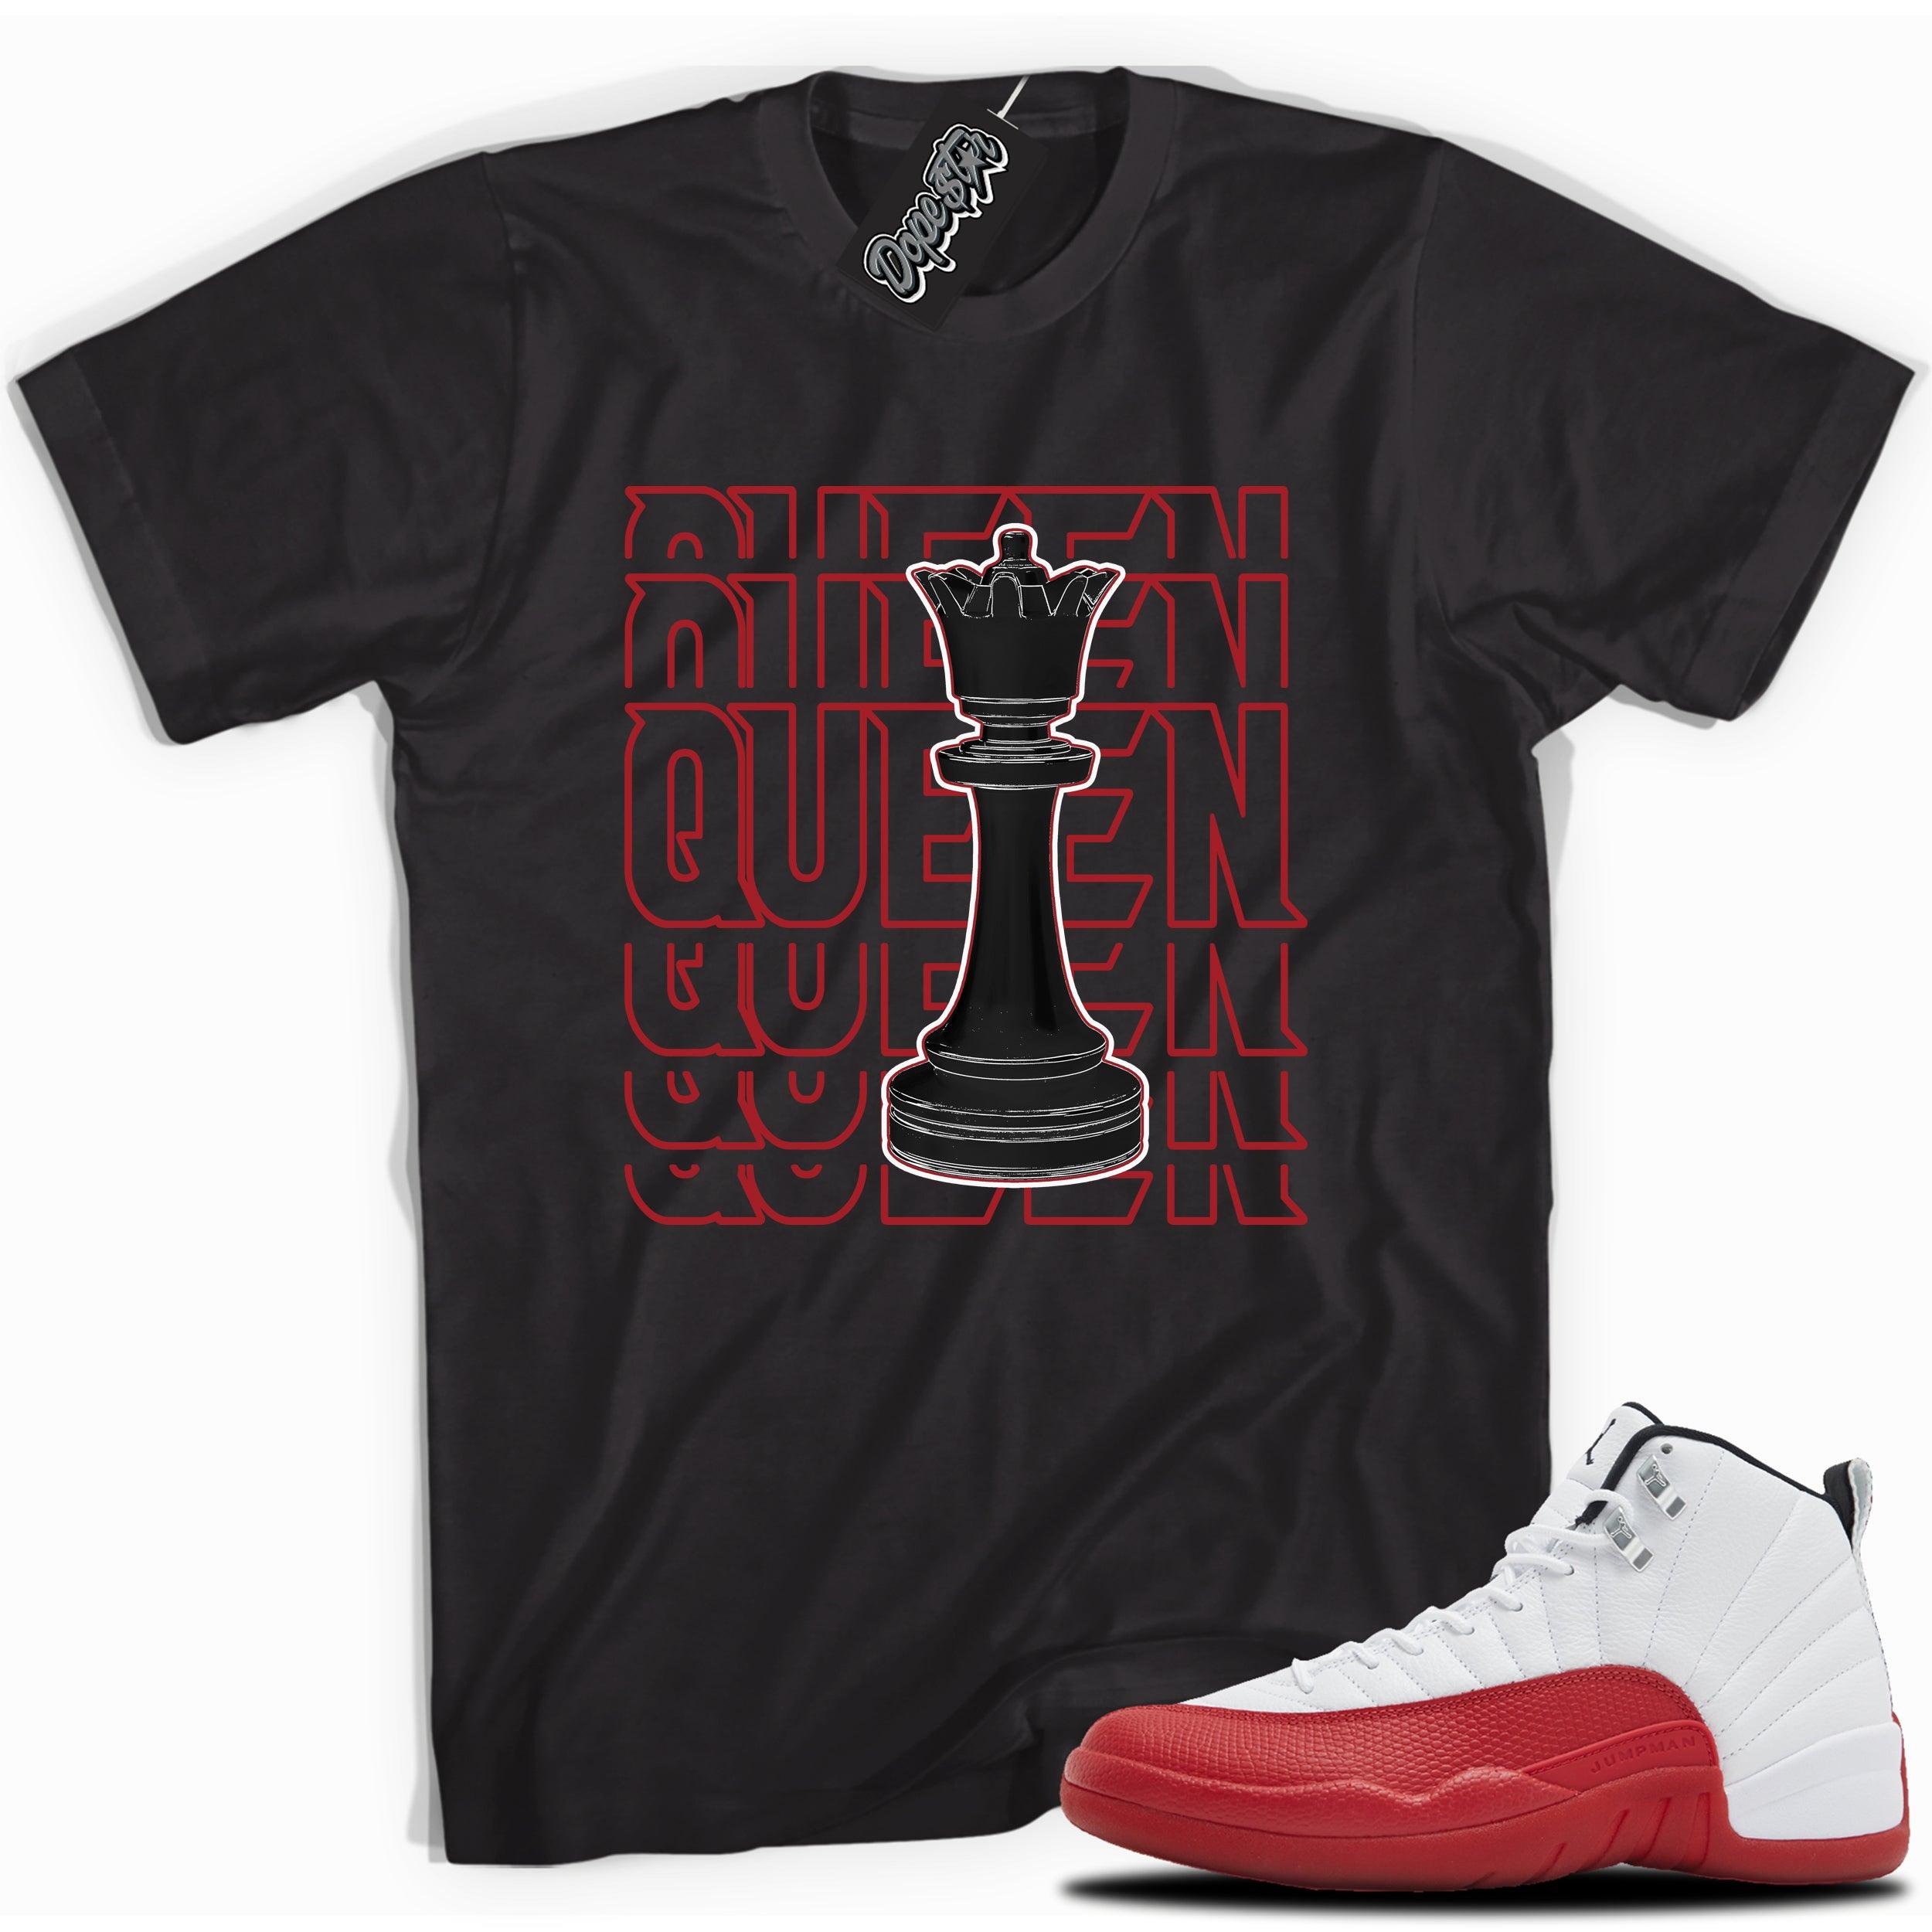 Cool Black graphic tee with “QUEEN” print, that perfectly matches Air Jordan 12 Retro Cherry Red 2023 red and white sneakers